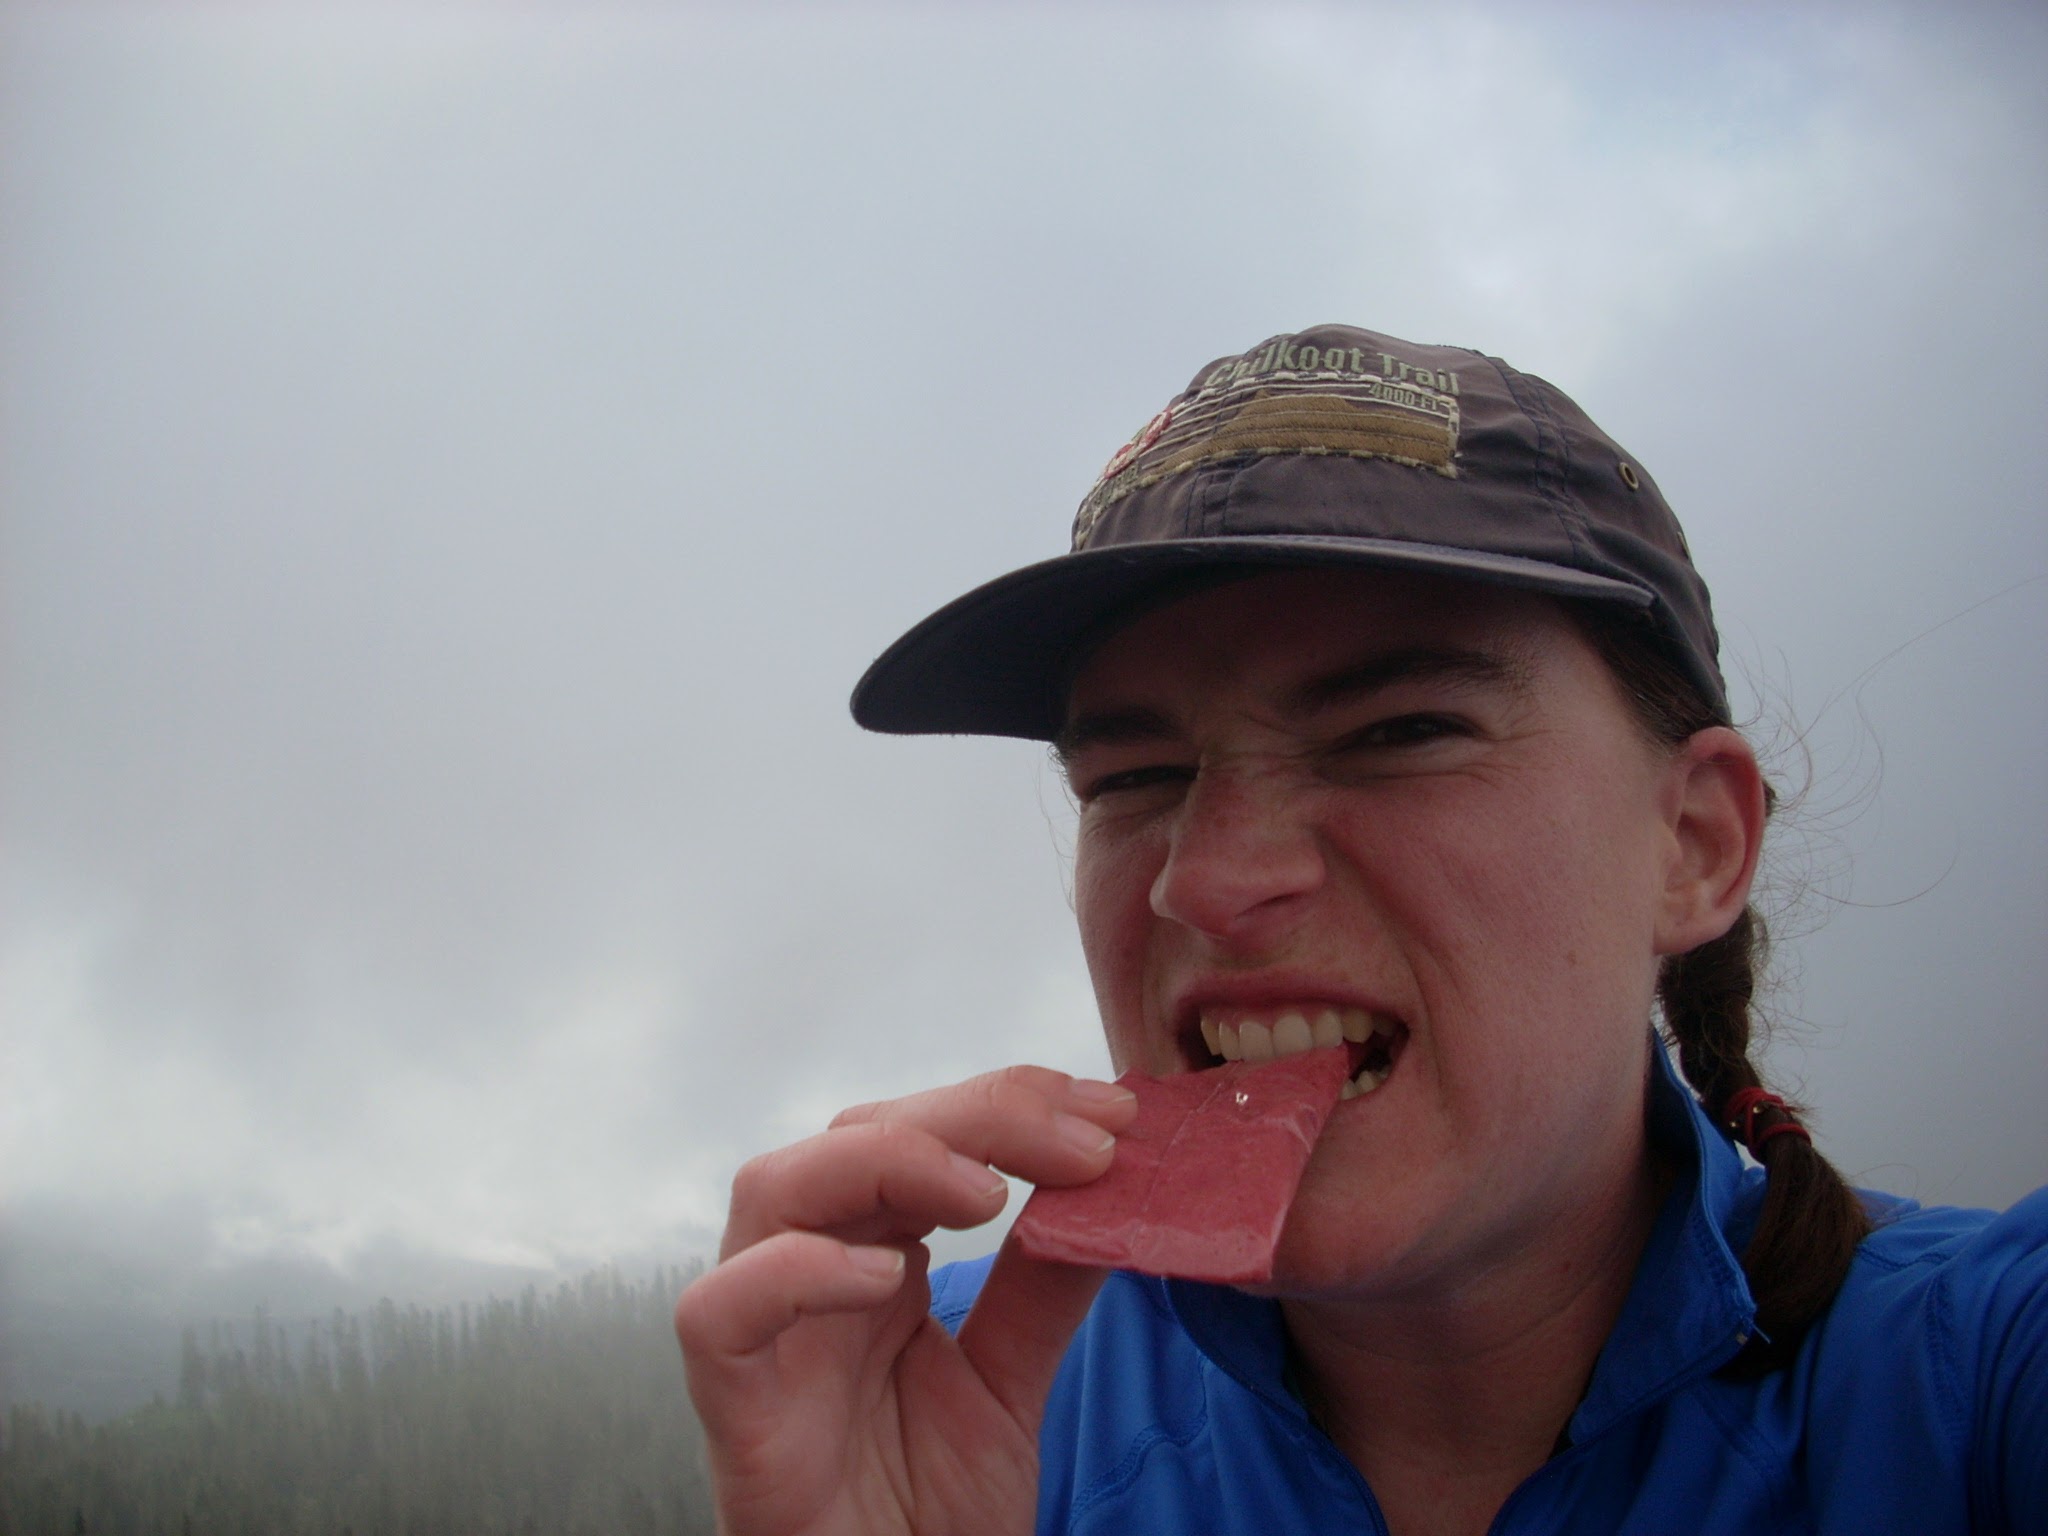 A woman making an annoyed face and eating a pink energy bar of some kind. She is wearing a blue shirt and a blue hat and there's fog swirling behind her